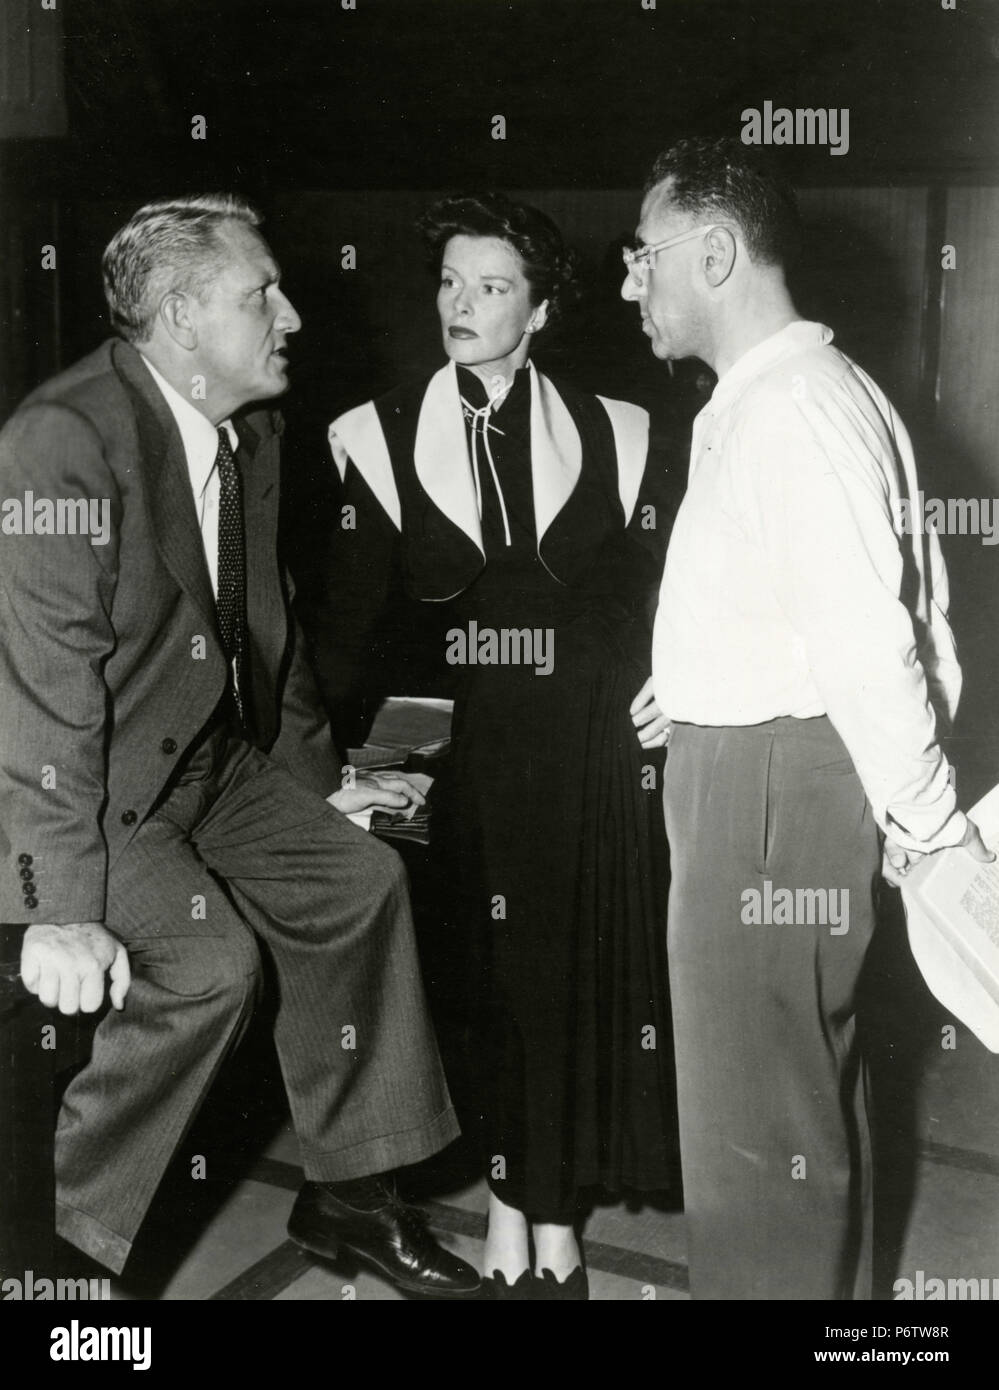 Actors Spencer Tracy and Katharine Hepburn with director George Cukor, 1940s Stock Photo